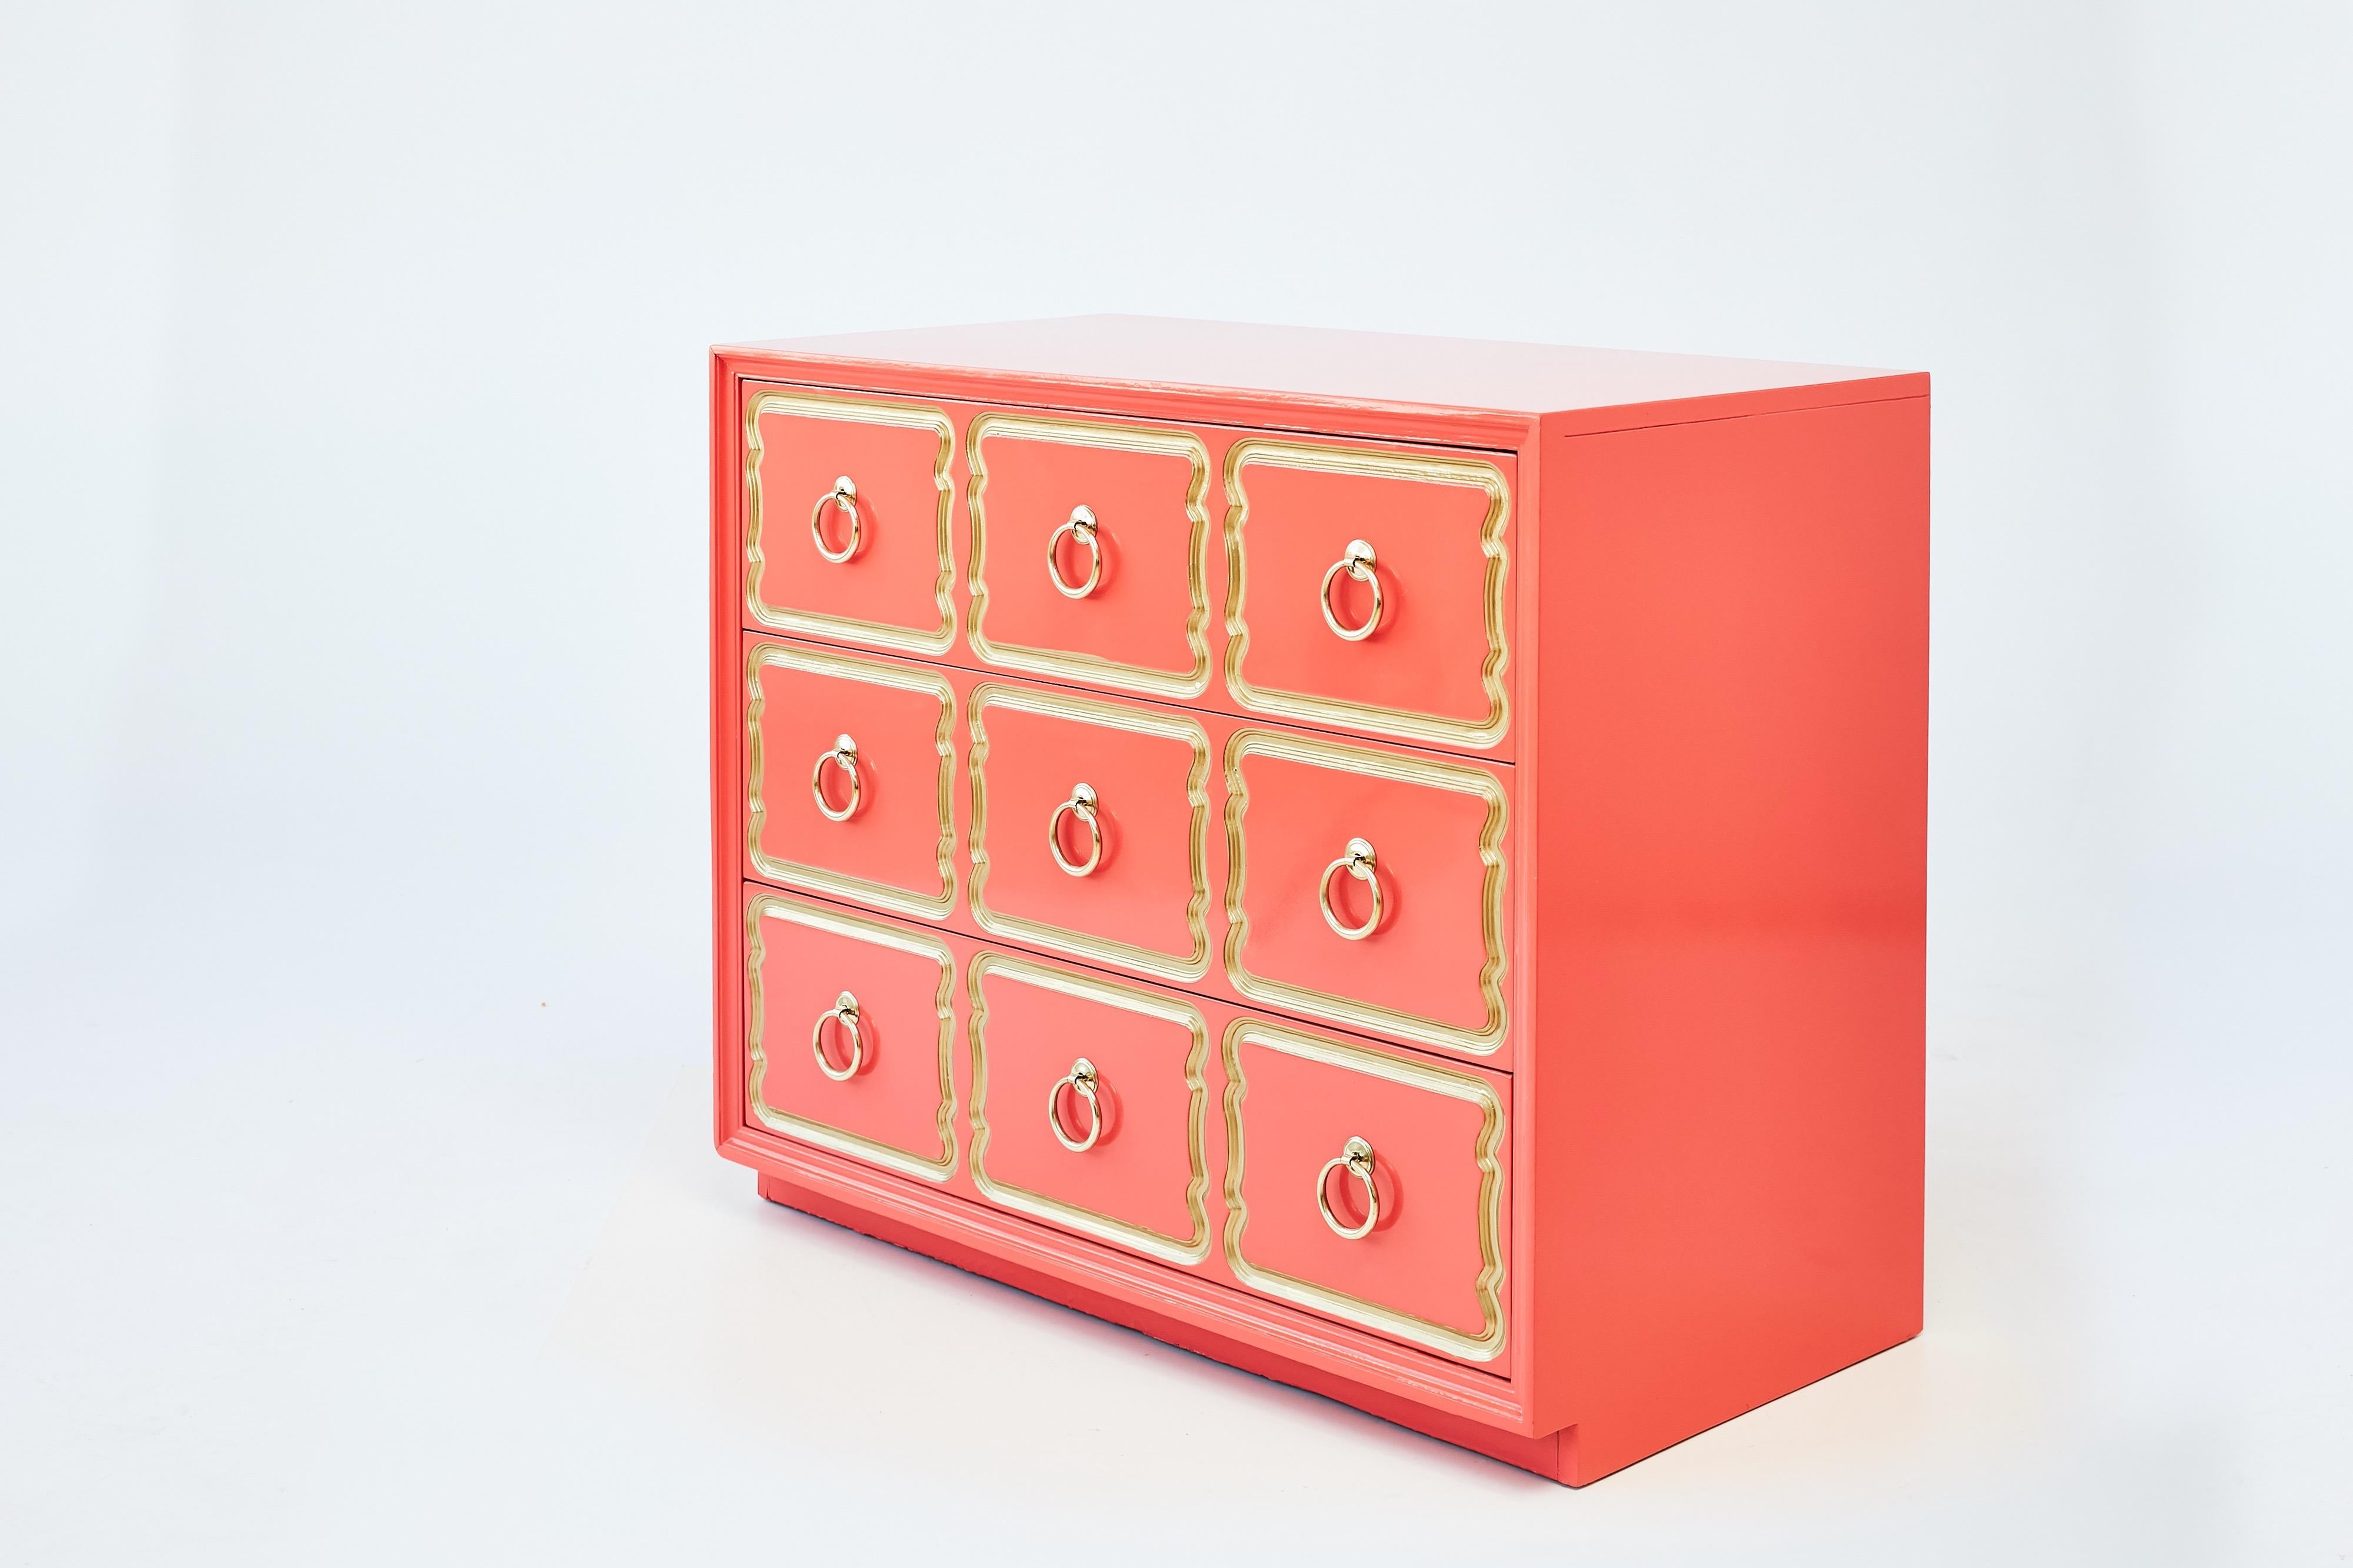 Authentic Dorothy Draper España chest, shown in Coral Lacquer. The crème de la crème - the most iconic of Hollywood Regency glam - is Dorothy Draper's España bunching chest. Dorothy Draper (1889-1969), America's most famous decorator, produced her